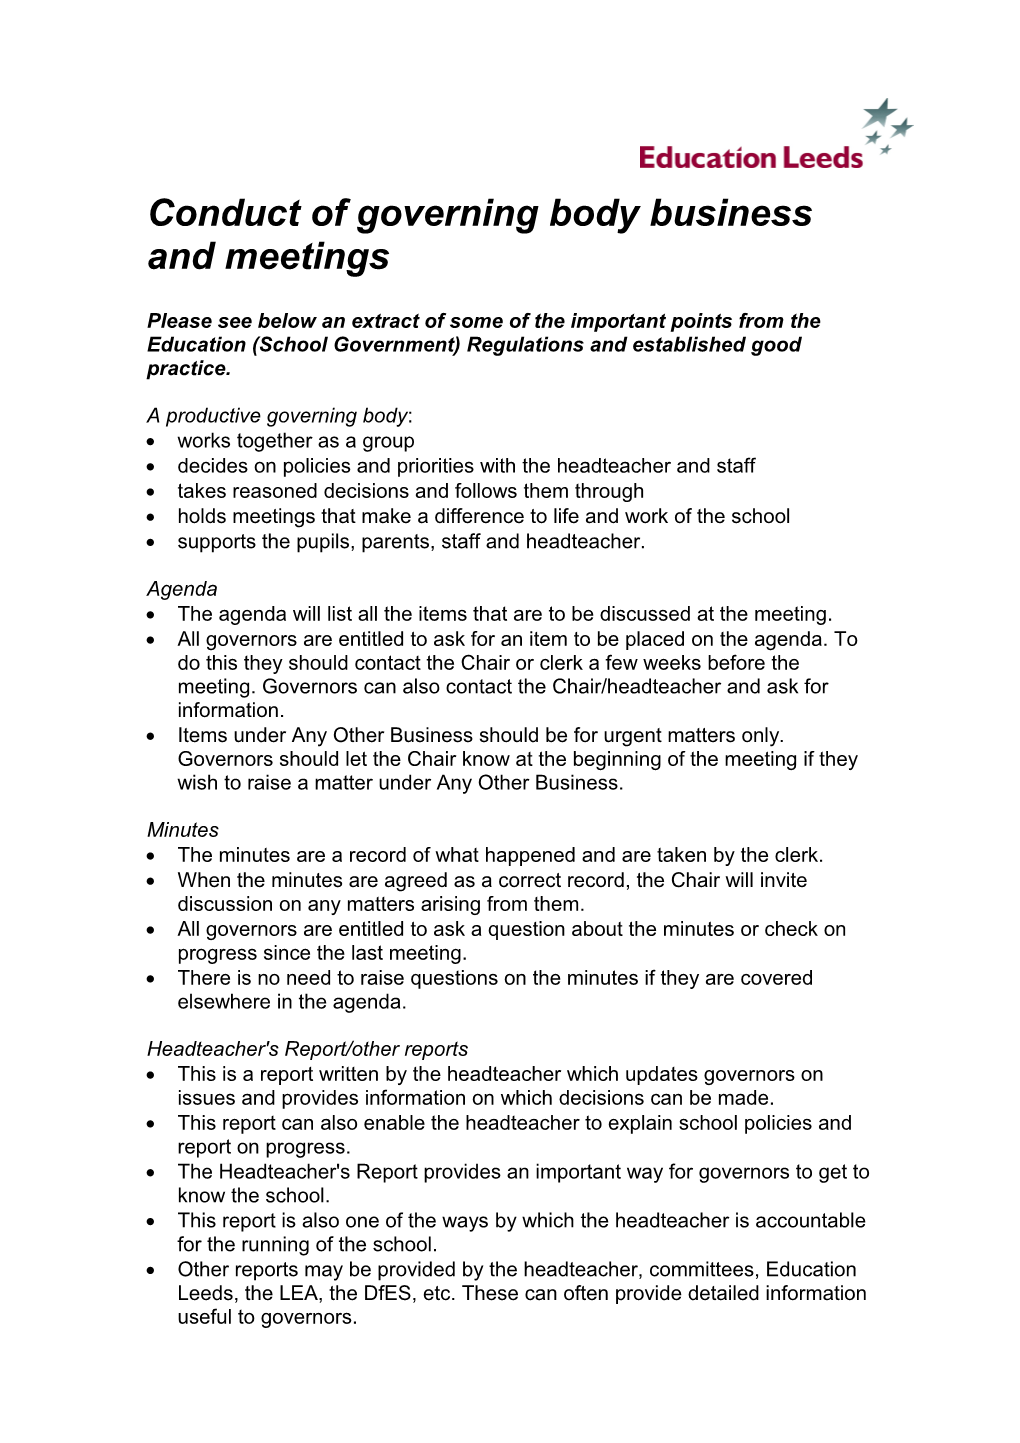 Conduct of Governing Body Business and Meetings